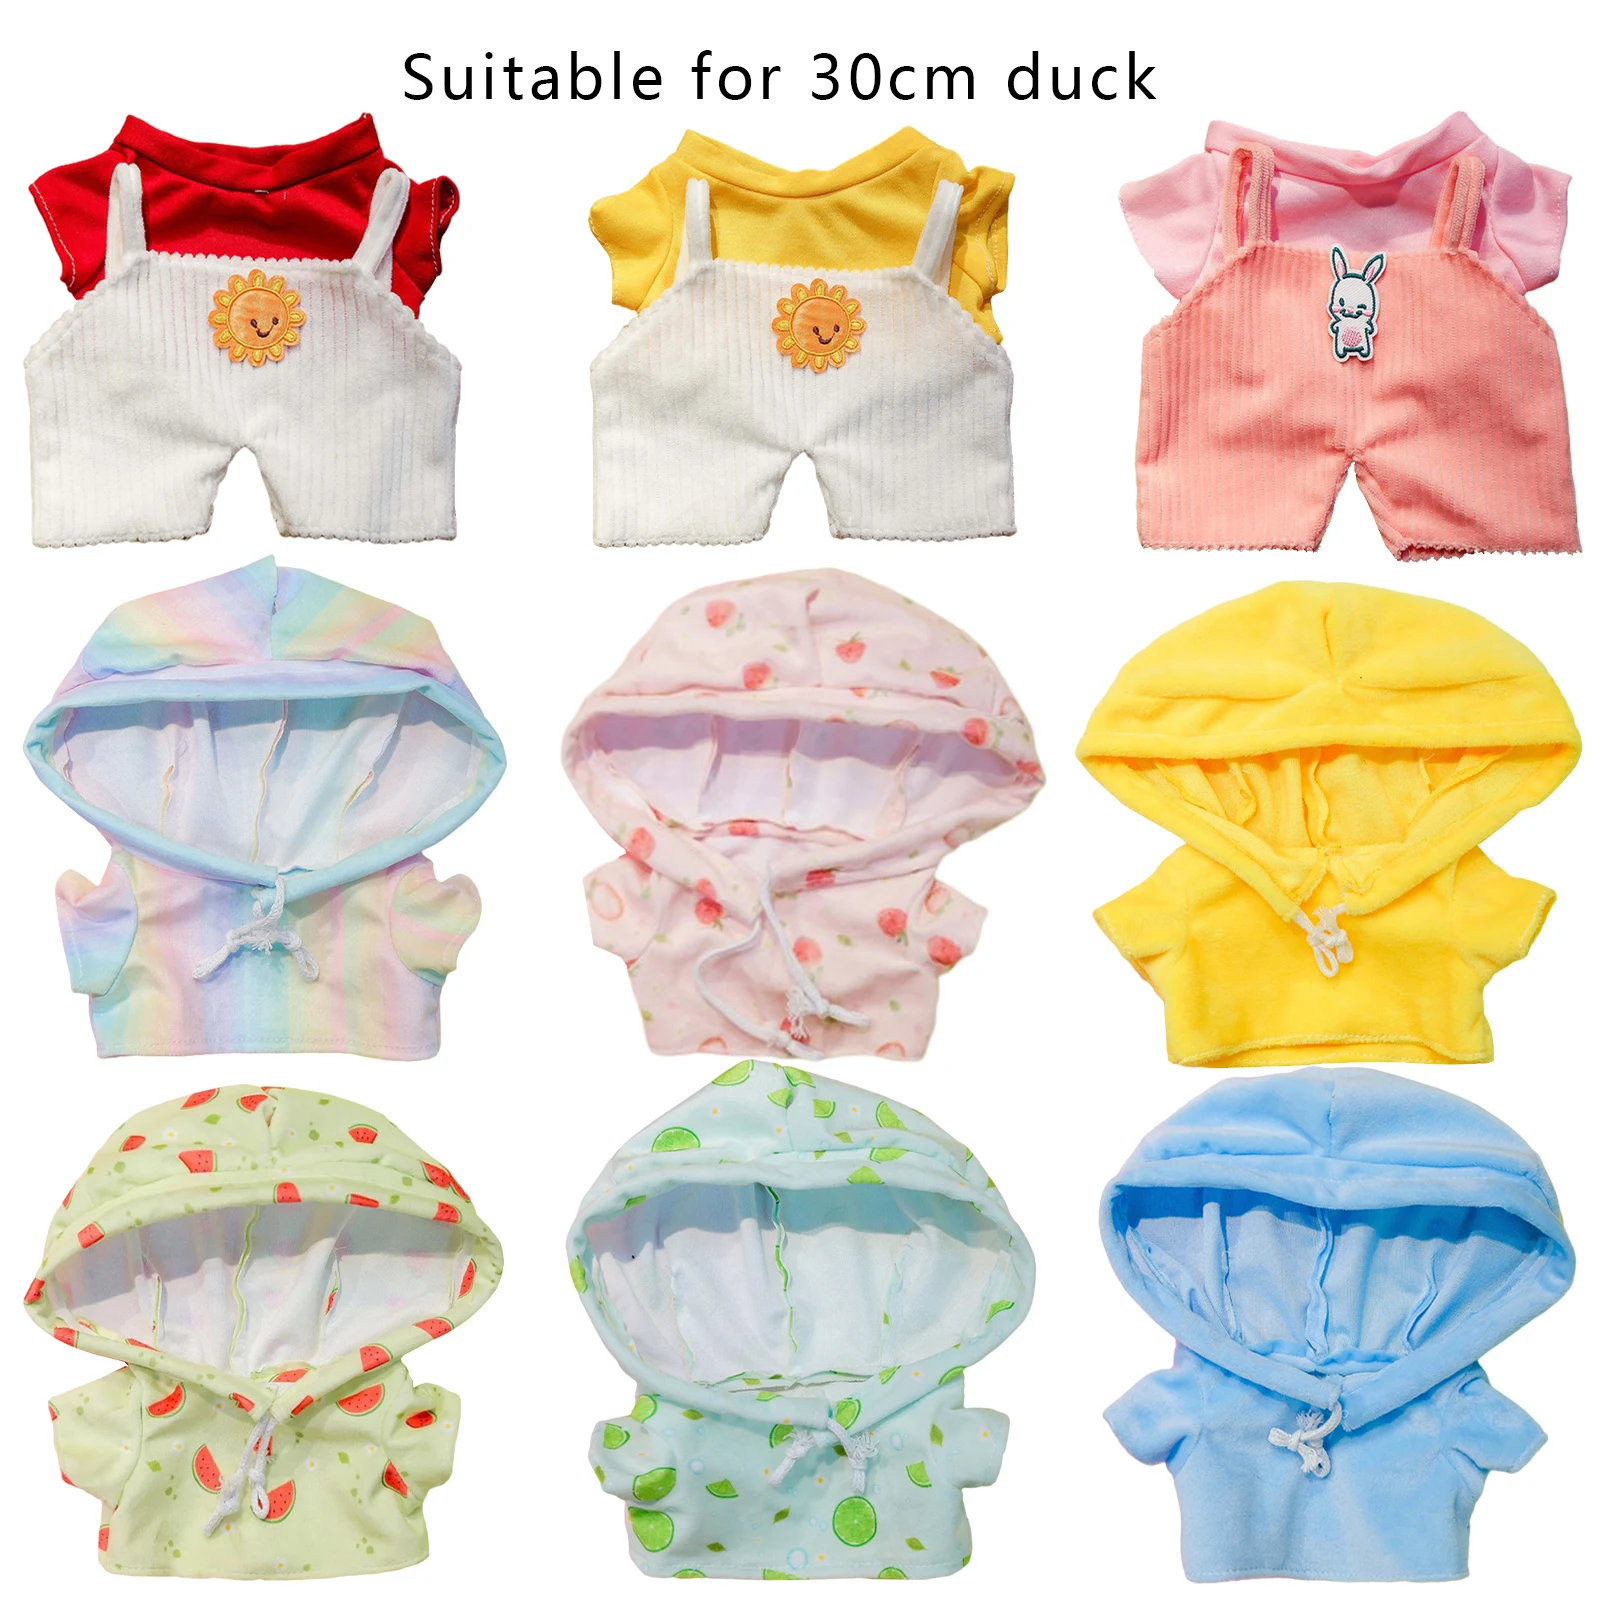 Clothes For Duck Lalafanfan 30 cm Yellow Plush Ducks Bags Clothes Glasses Hairband Plush Animal Doll Accessories Duck Girls Gift